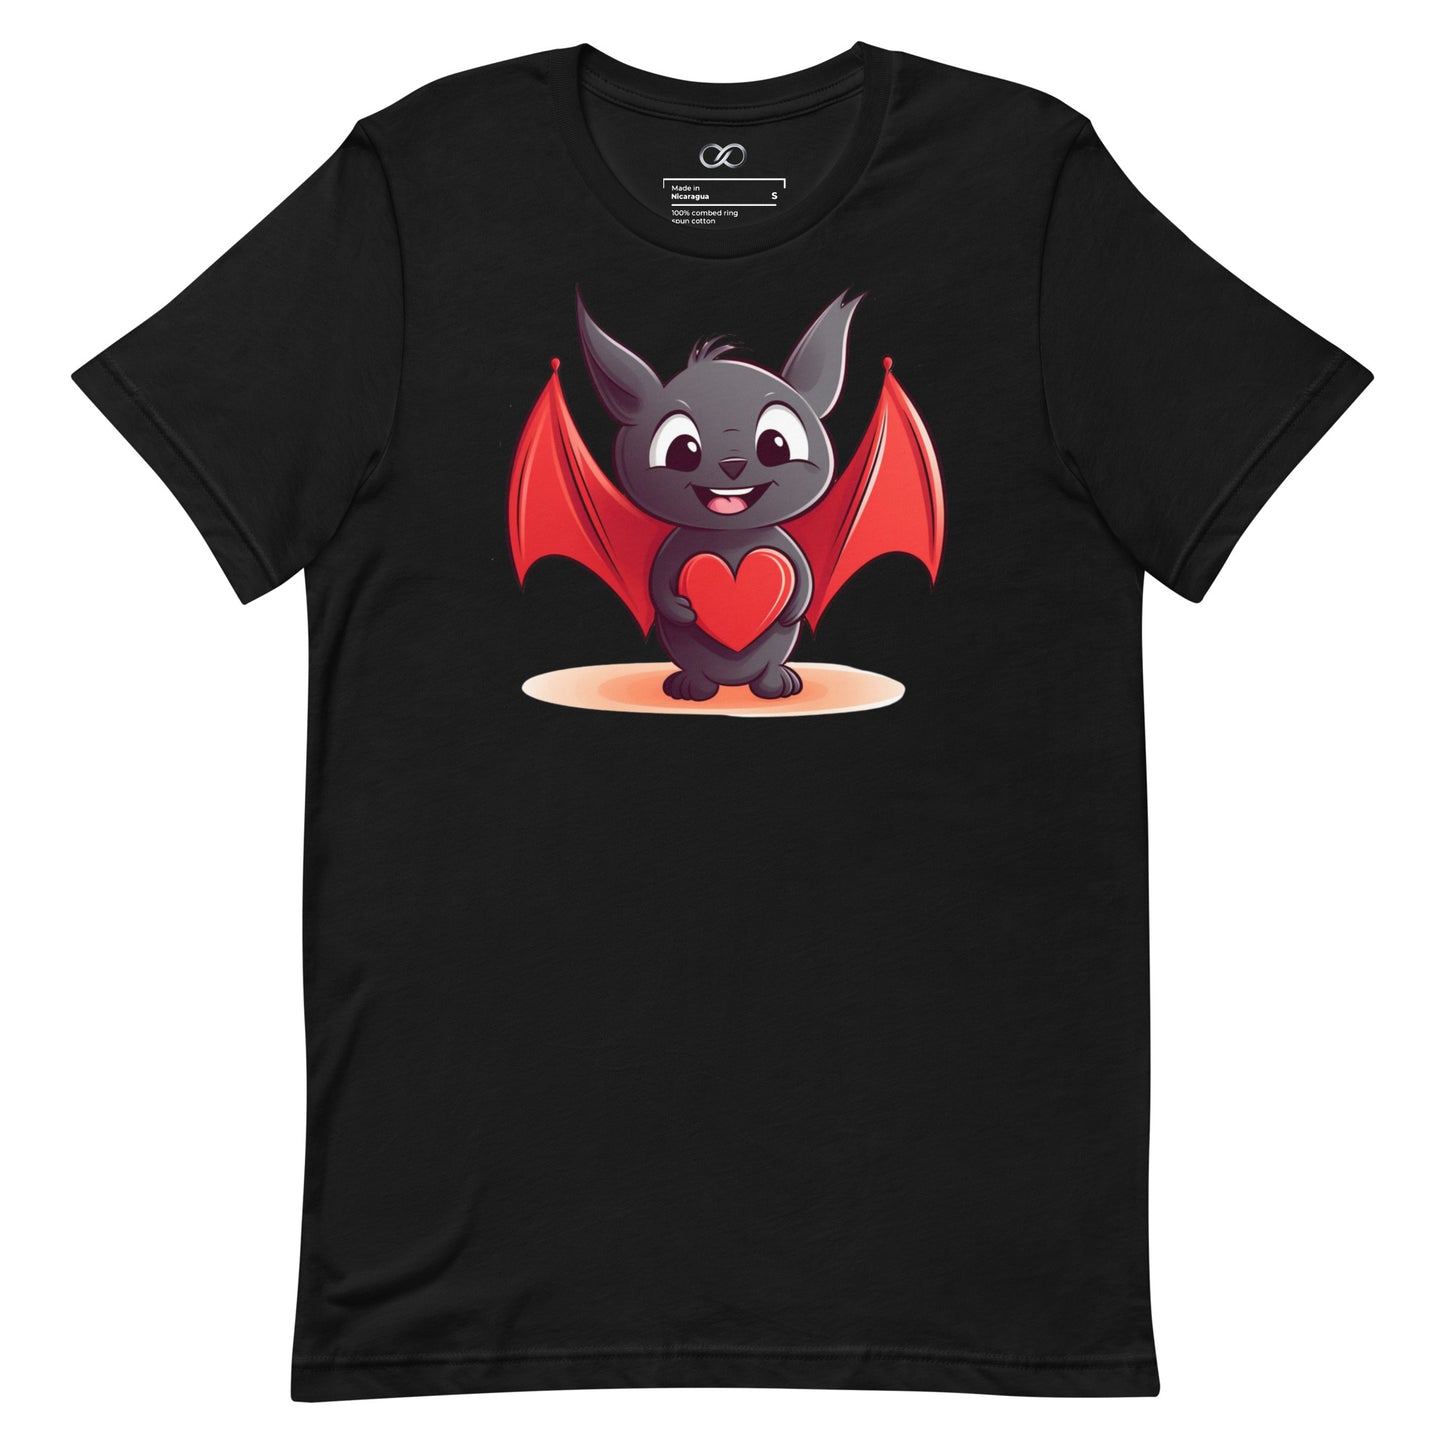 Black t-shirt with a cheerful cartoon bat character in the center, holding a heart, with wide eyes and large red wings.